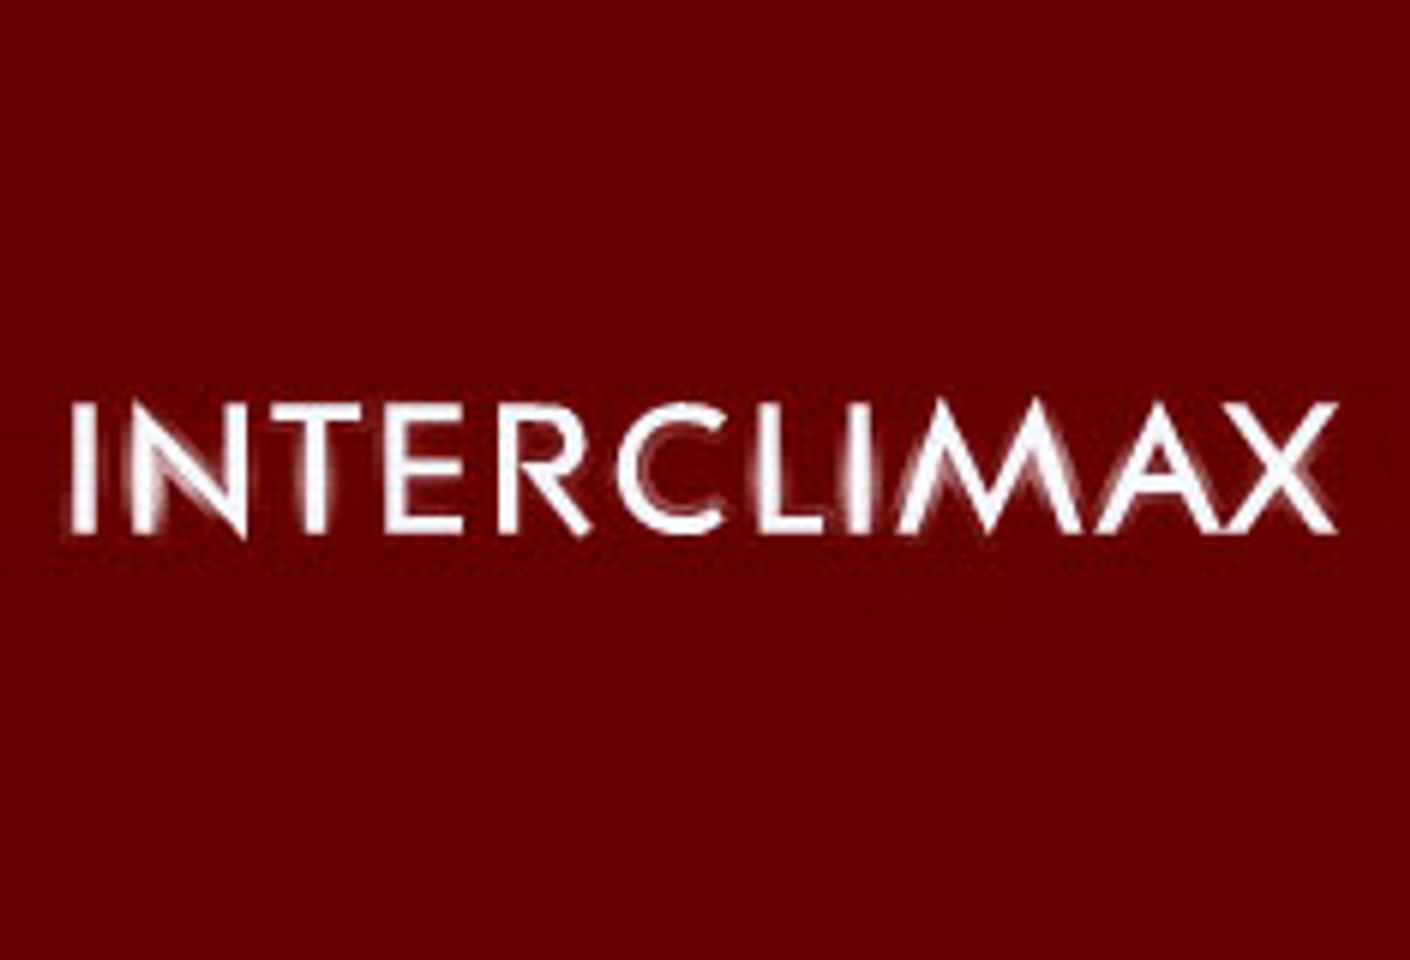 InterClimax Adds Real-Time Gay Feeds